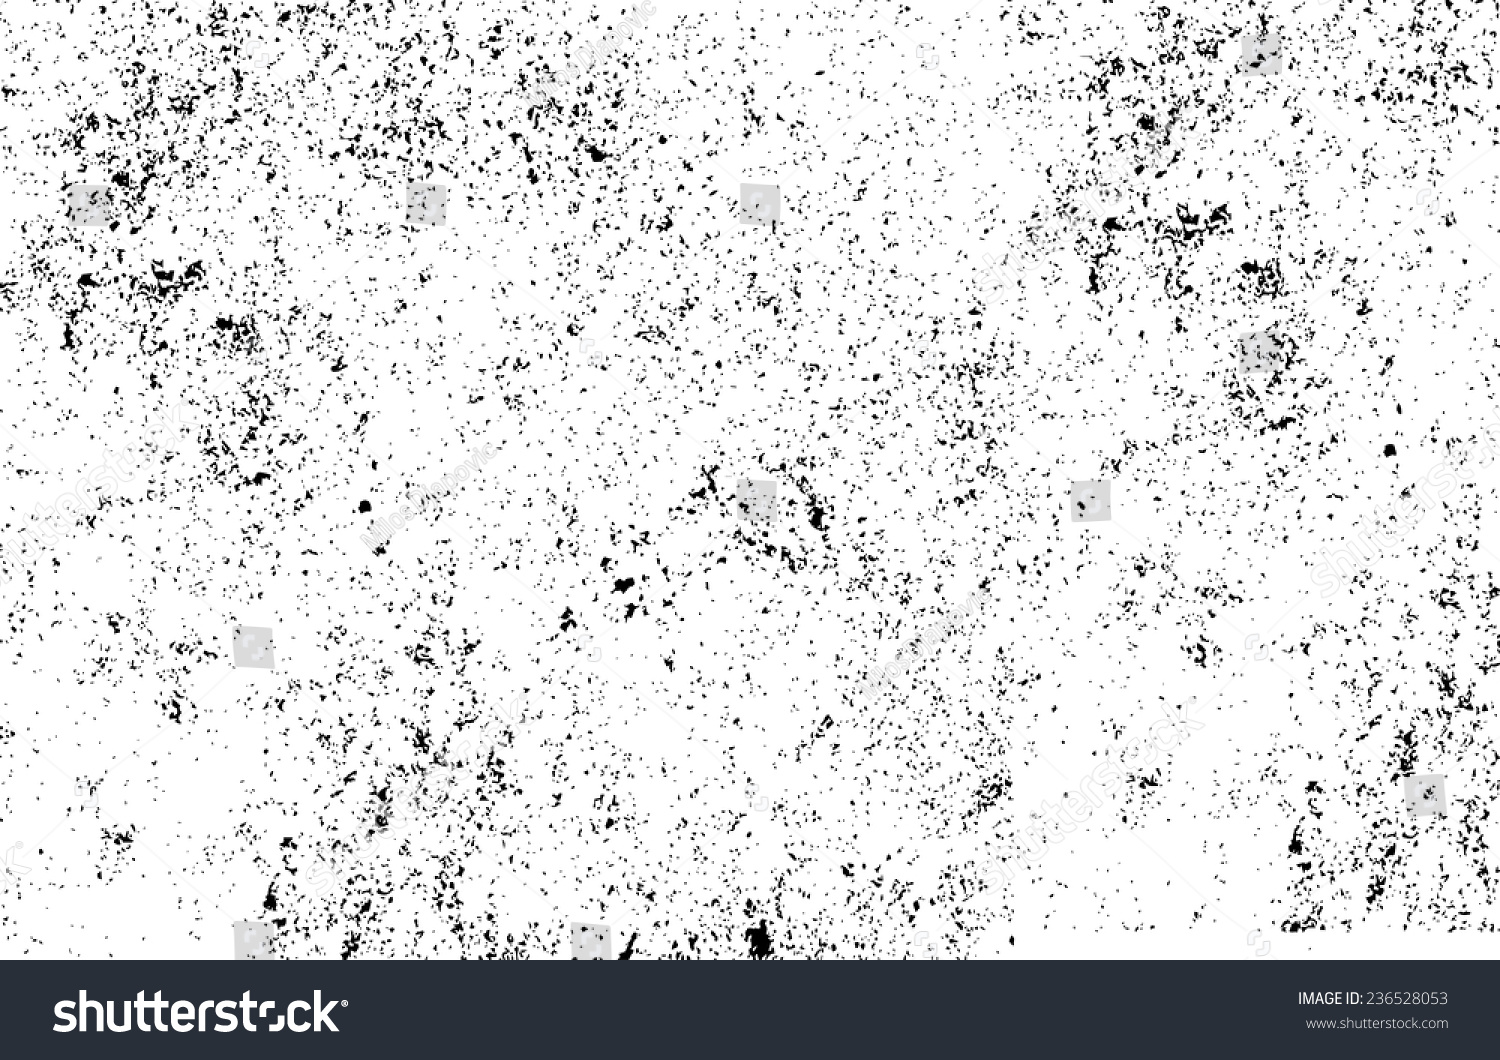 Grunge texture - abstract stock vector template - easy to use #236528053